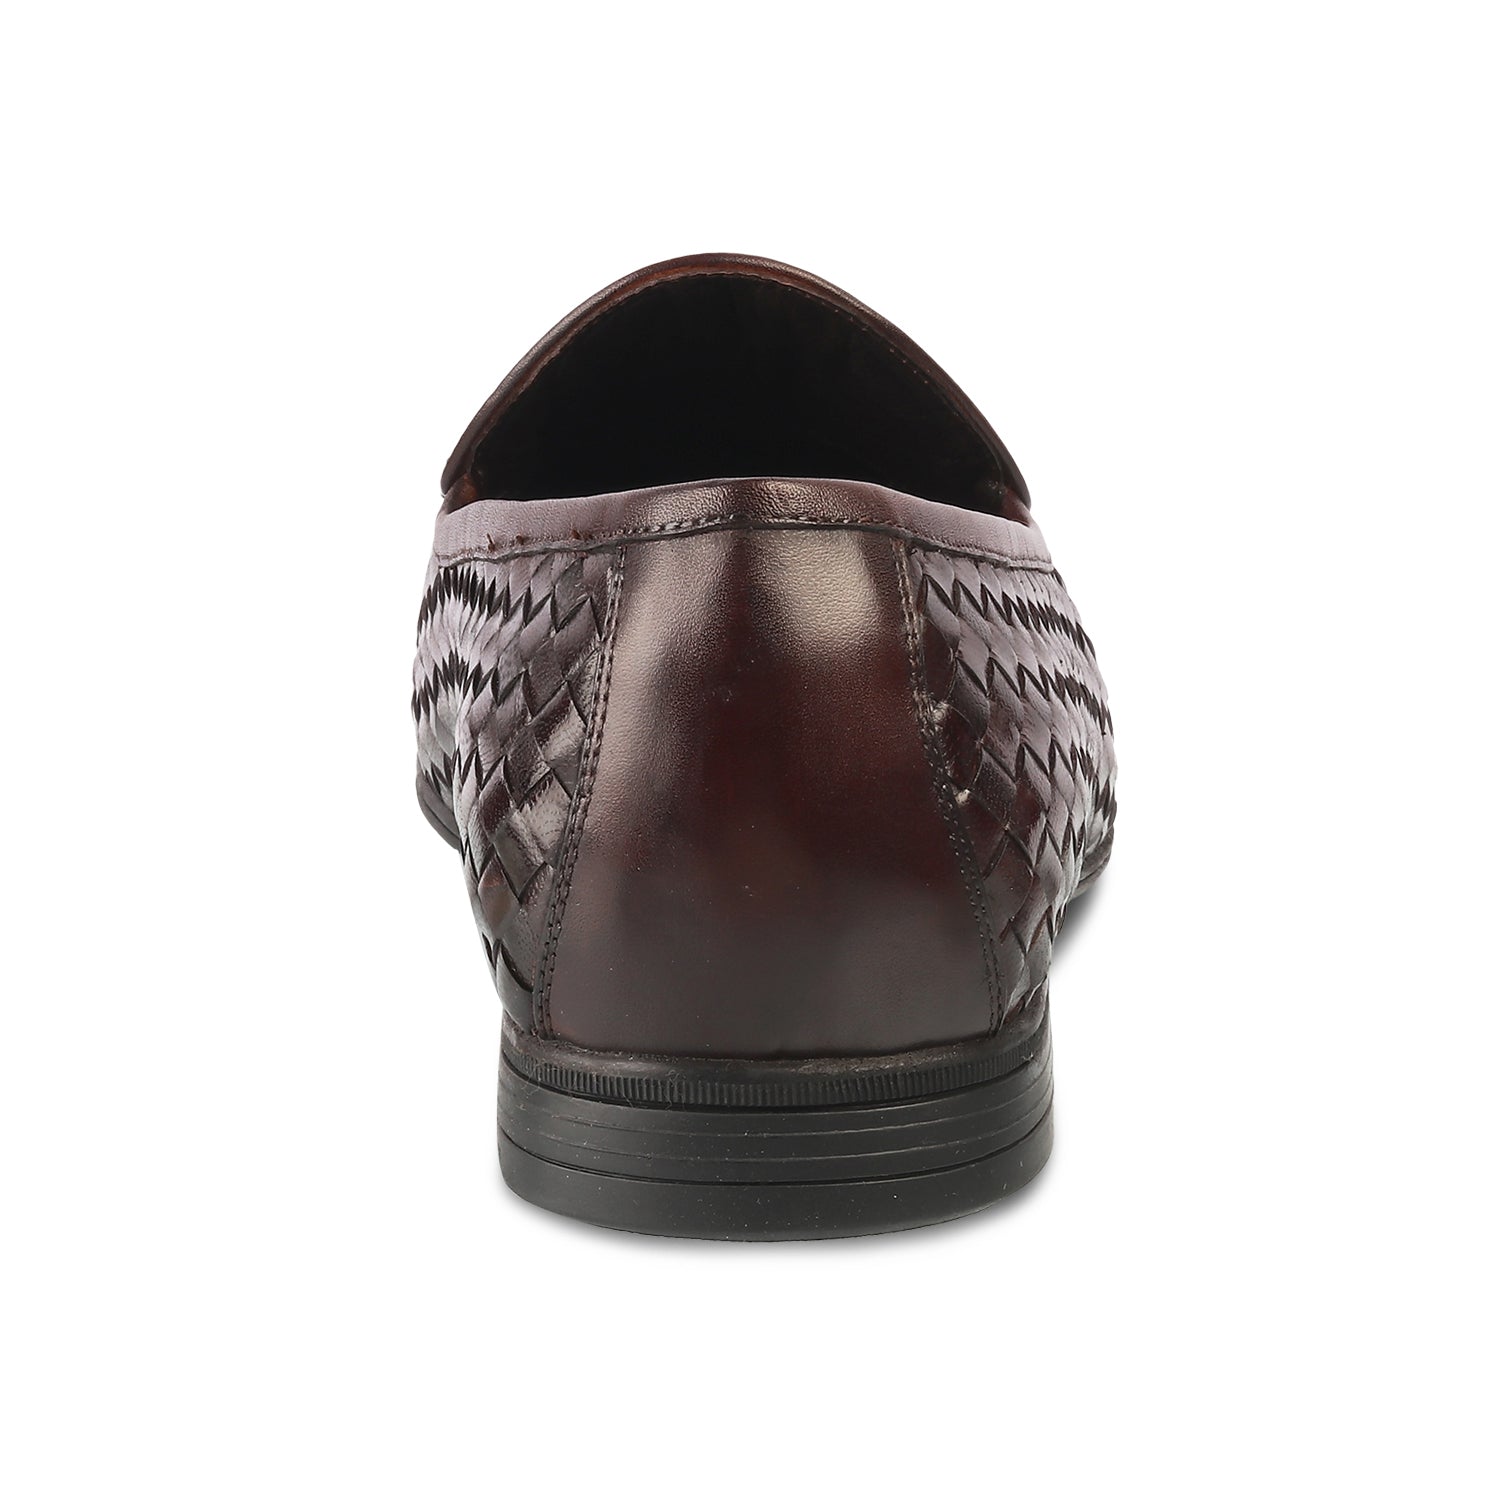 Sobhach Brown Men's Smart Casual Leather Loafer Online at Tresmode.com